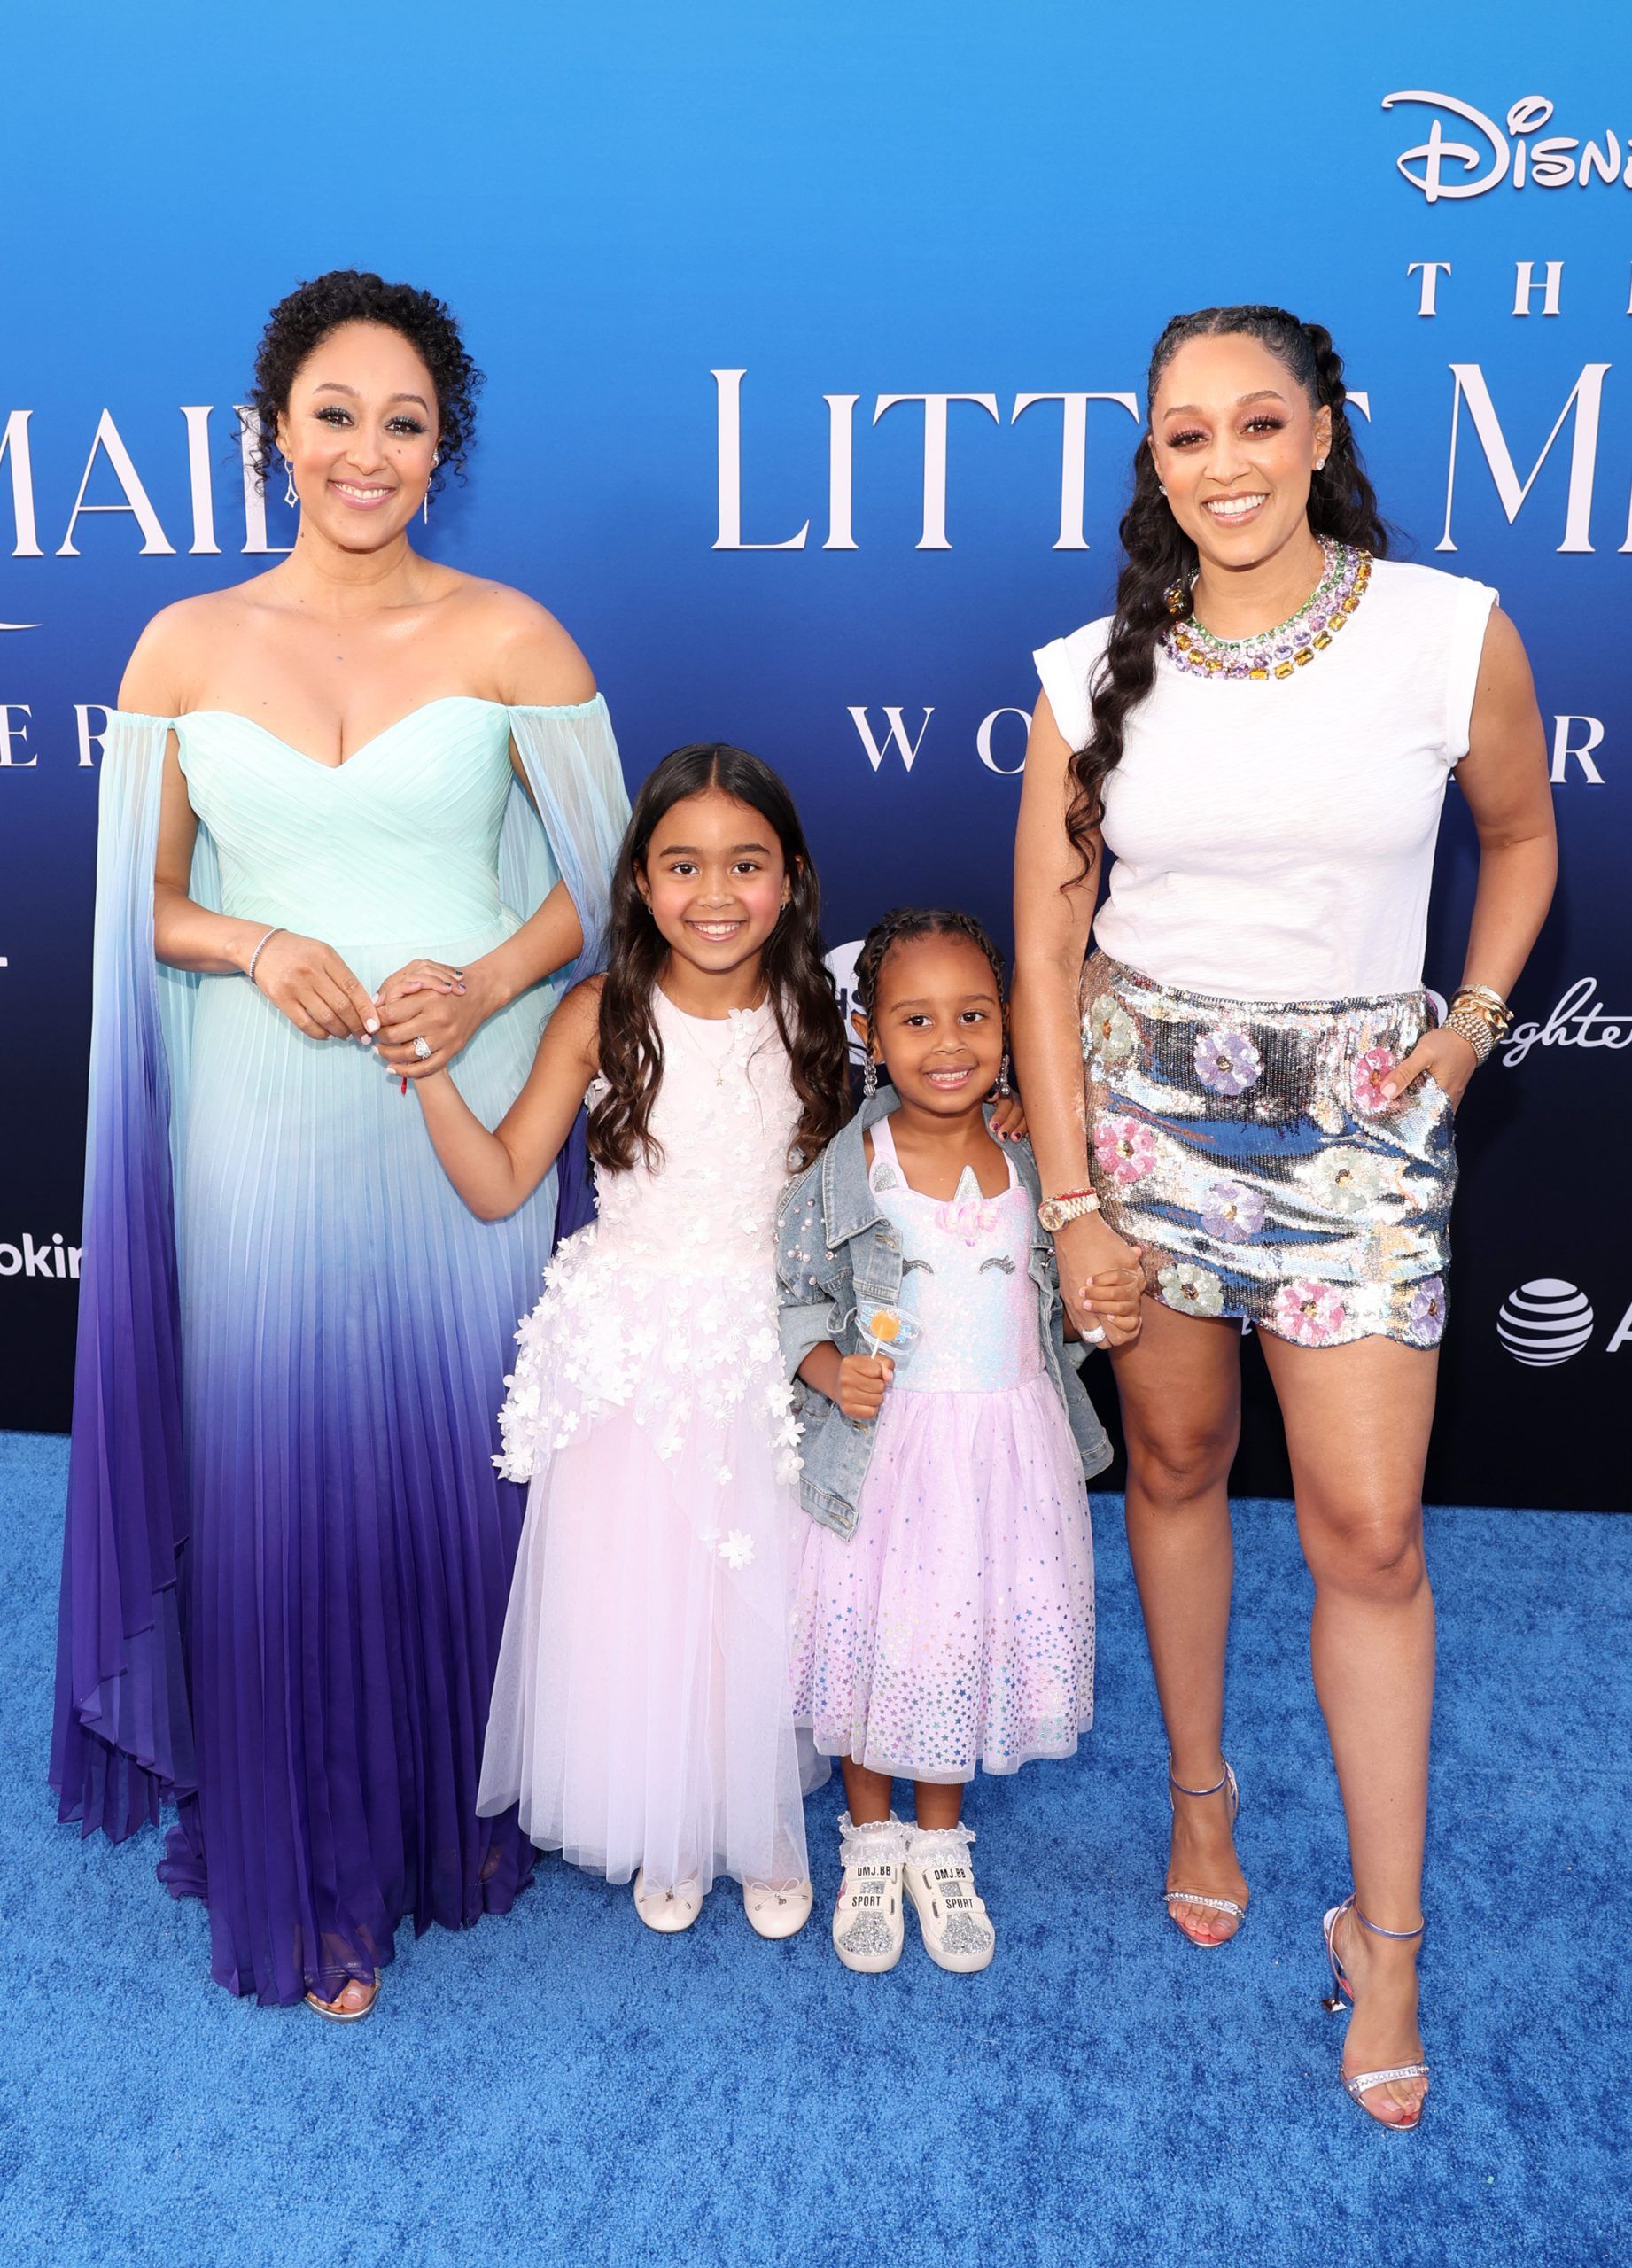 Celebrities Hit The Carpet With Their Kids For Disney’s “The Little Mermaid’ Premiere